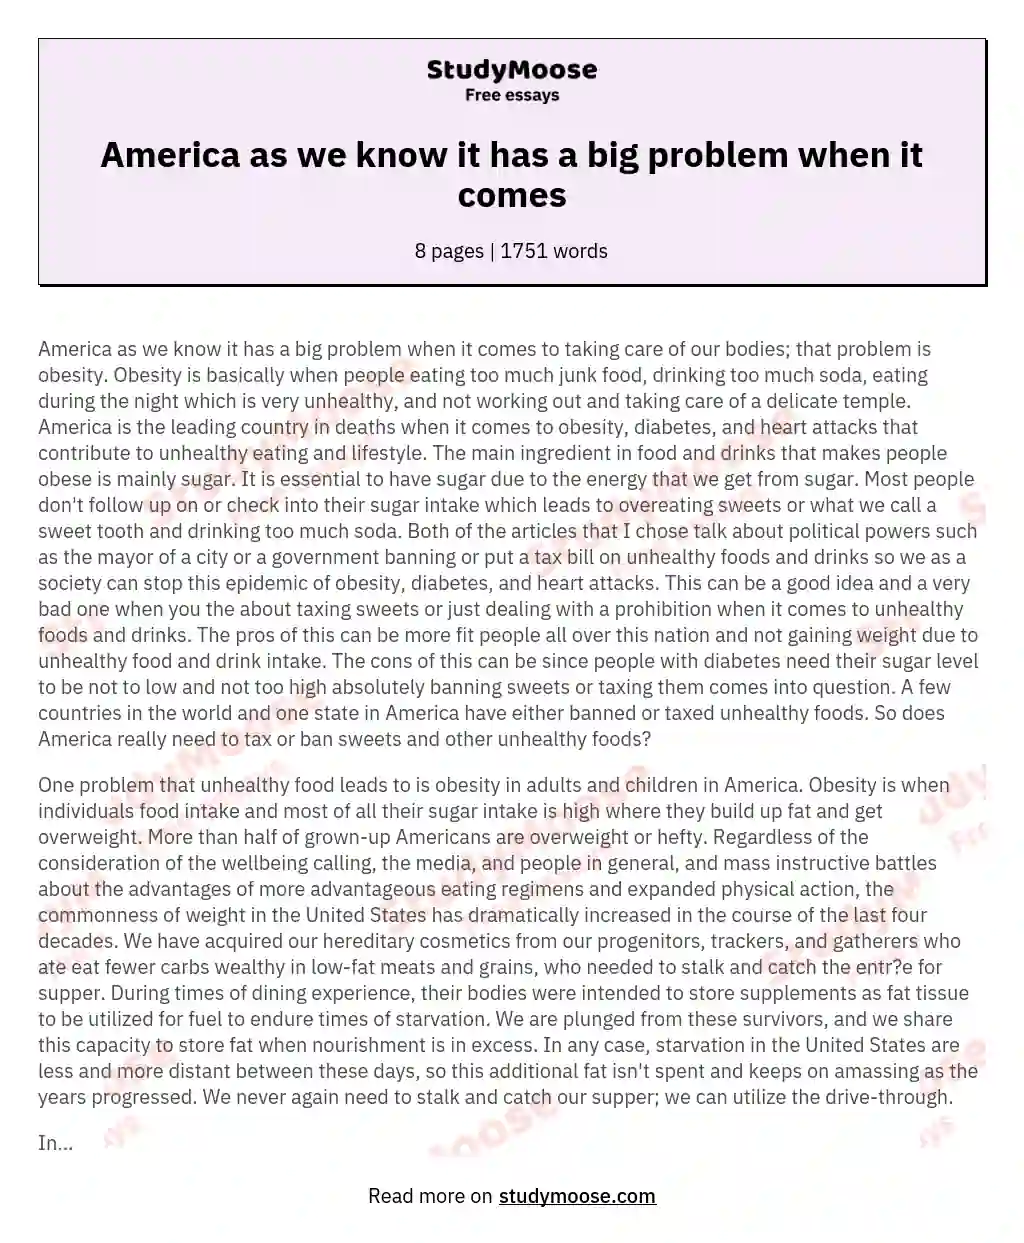 America as we know it has a big problem when it comes essay